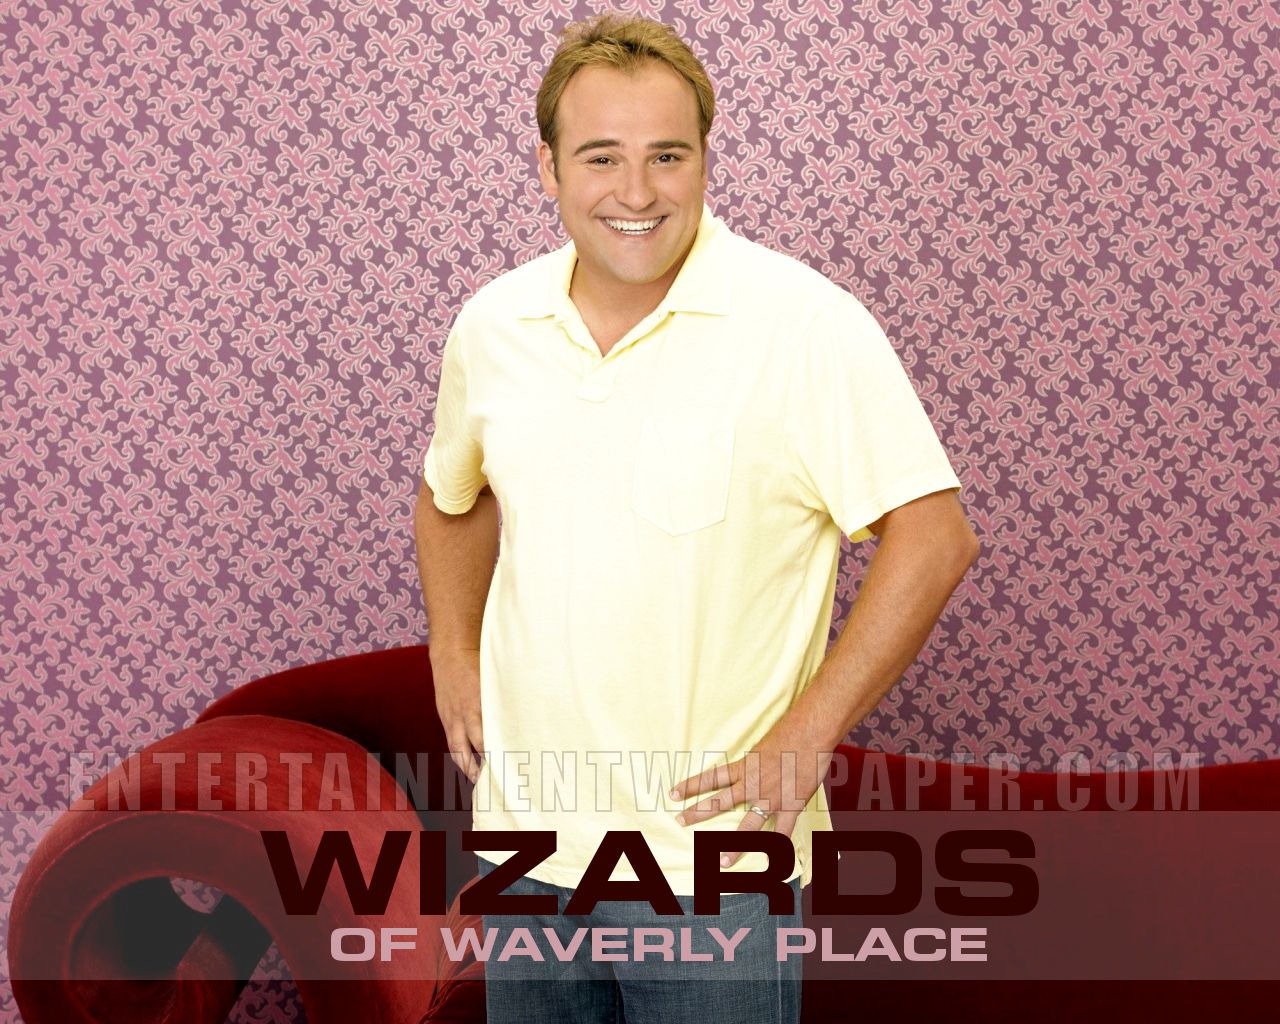 Wizards of Waverly Place 少年魔法師 #20 - 1280x1024